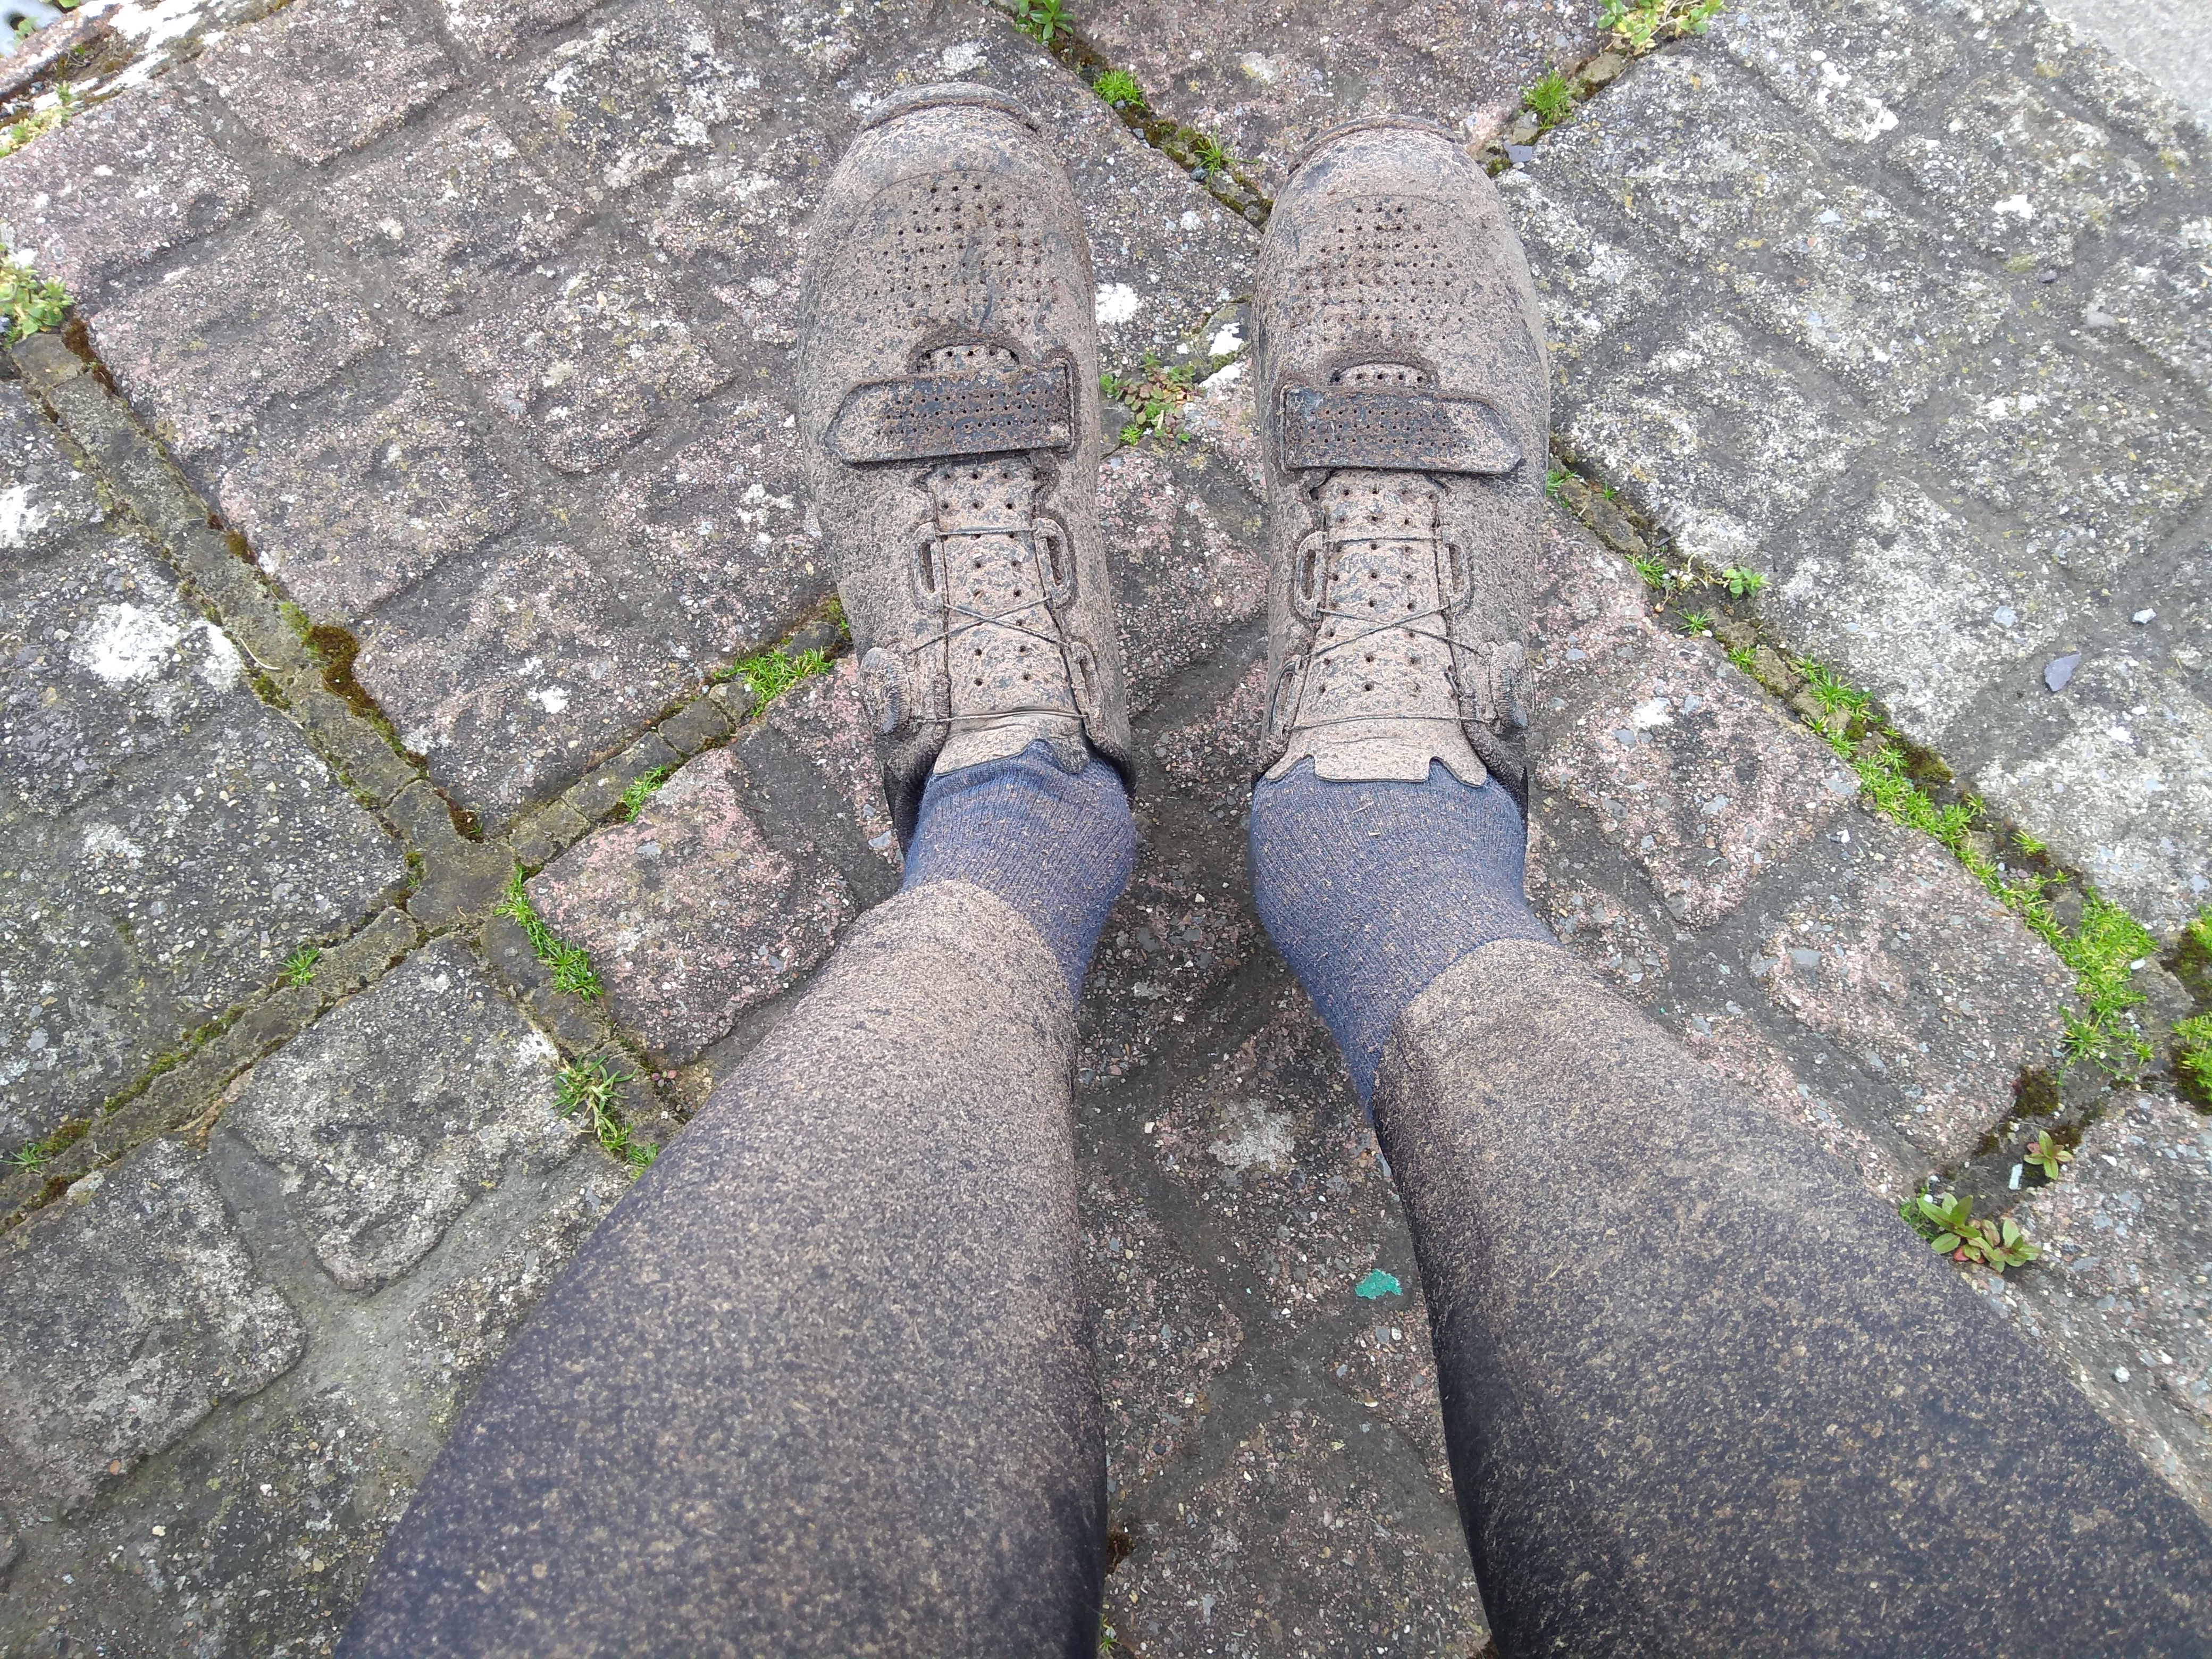 Muddy shoes and tights